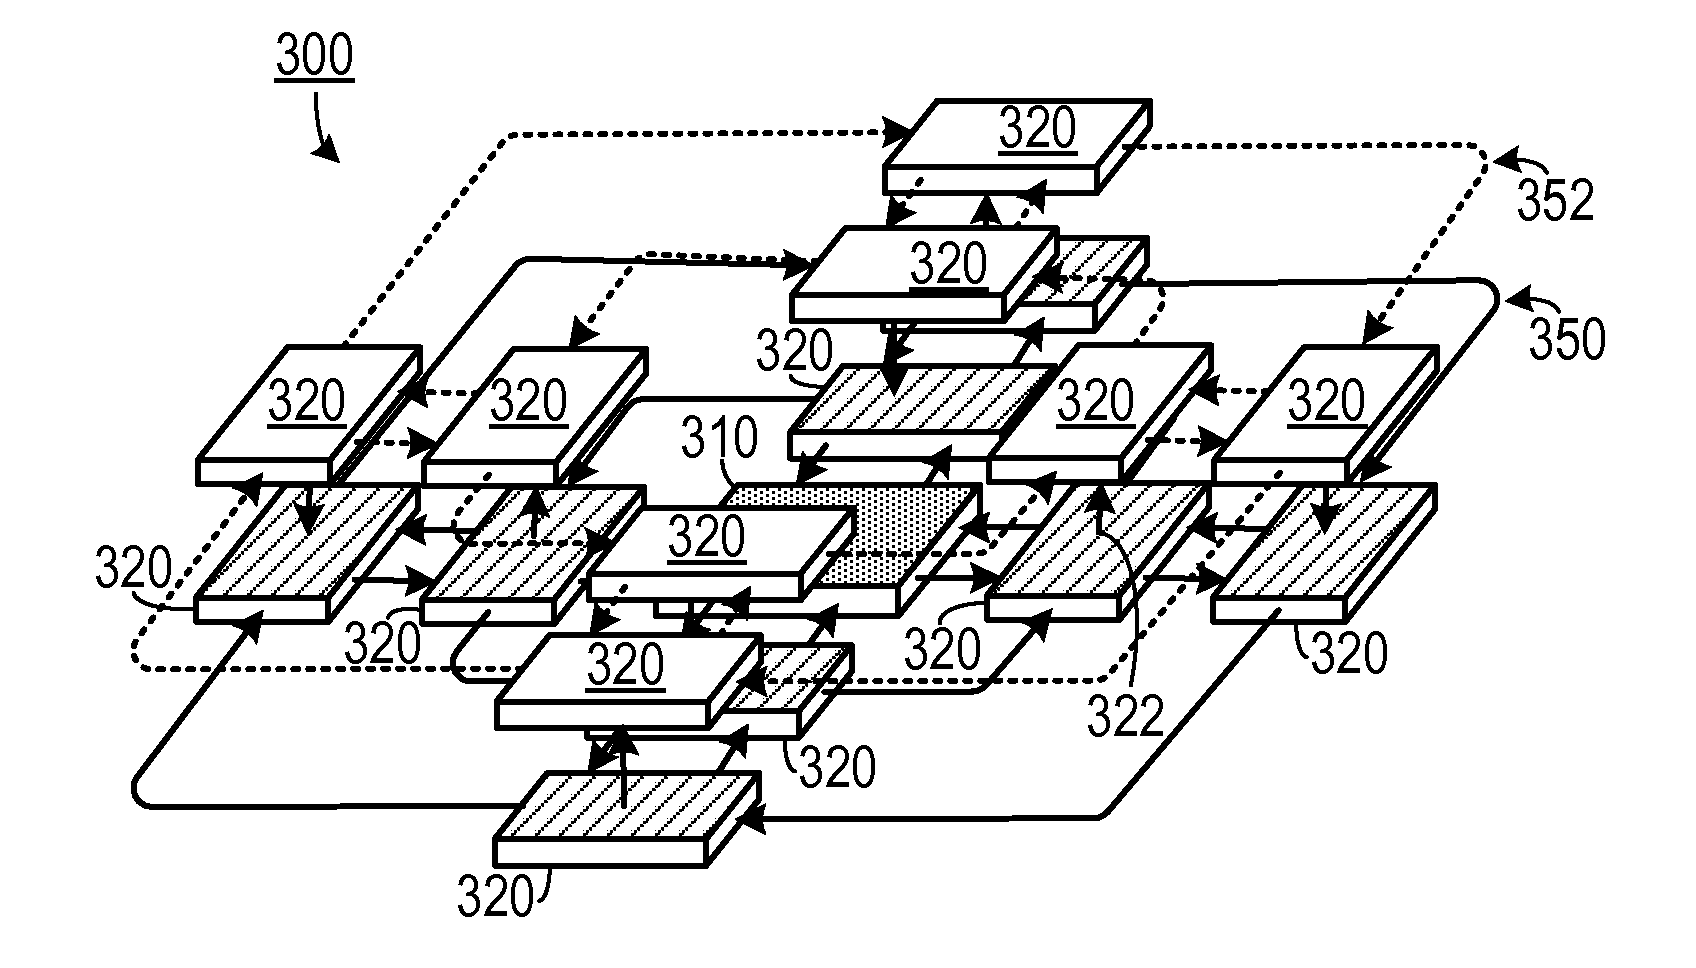 Spider Web Interconnect Topology Utilizing Multiple Port Connection